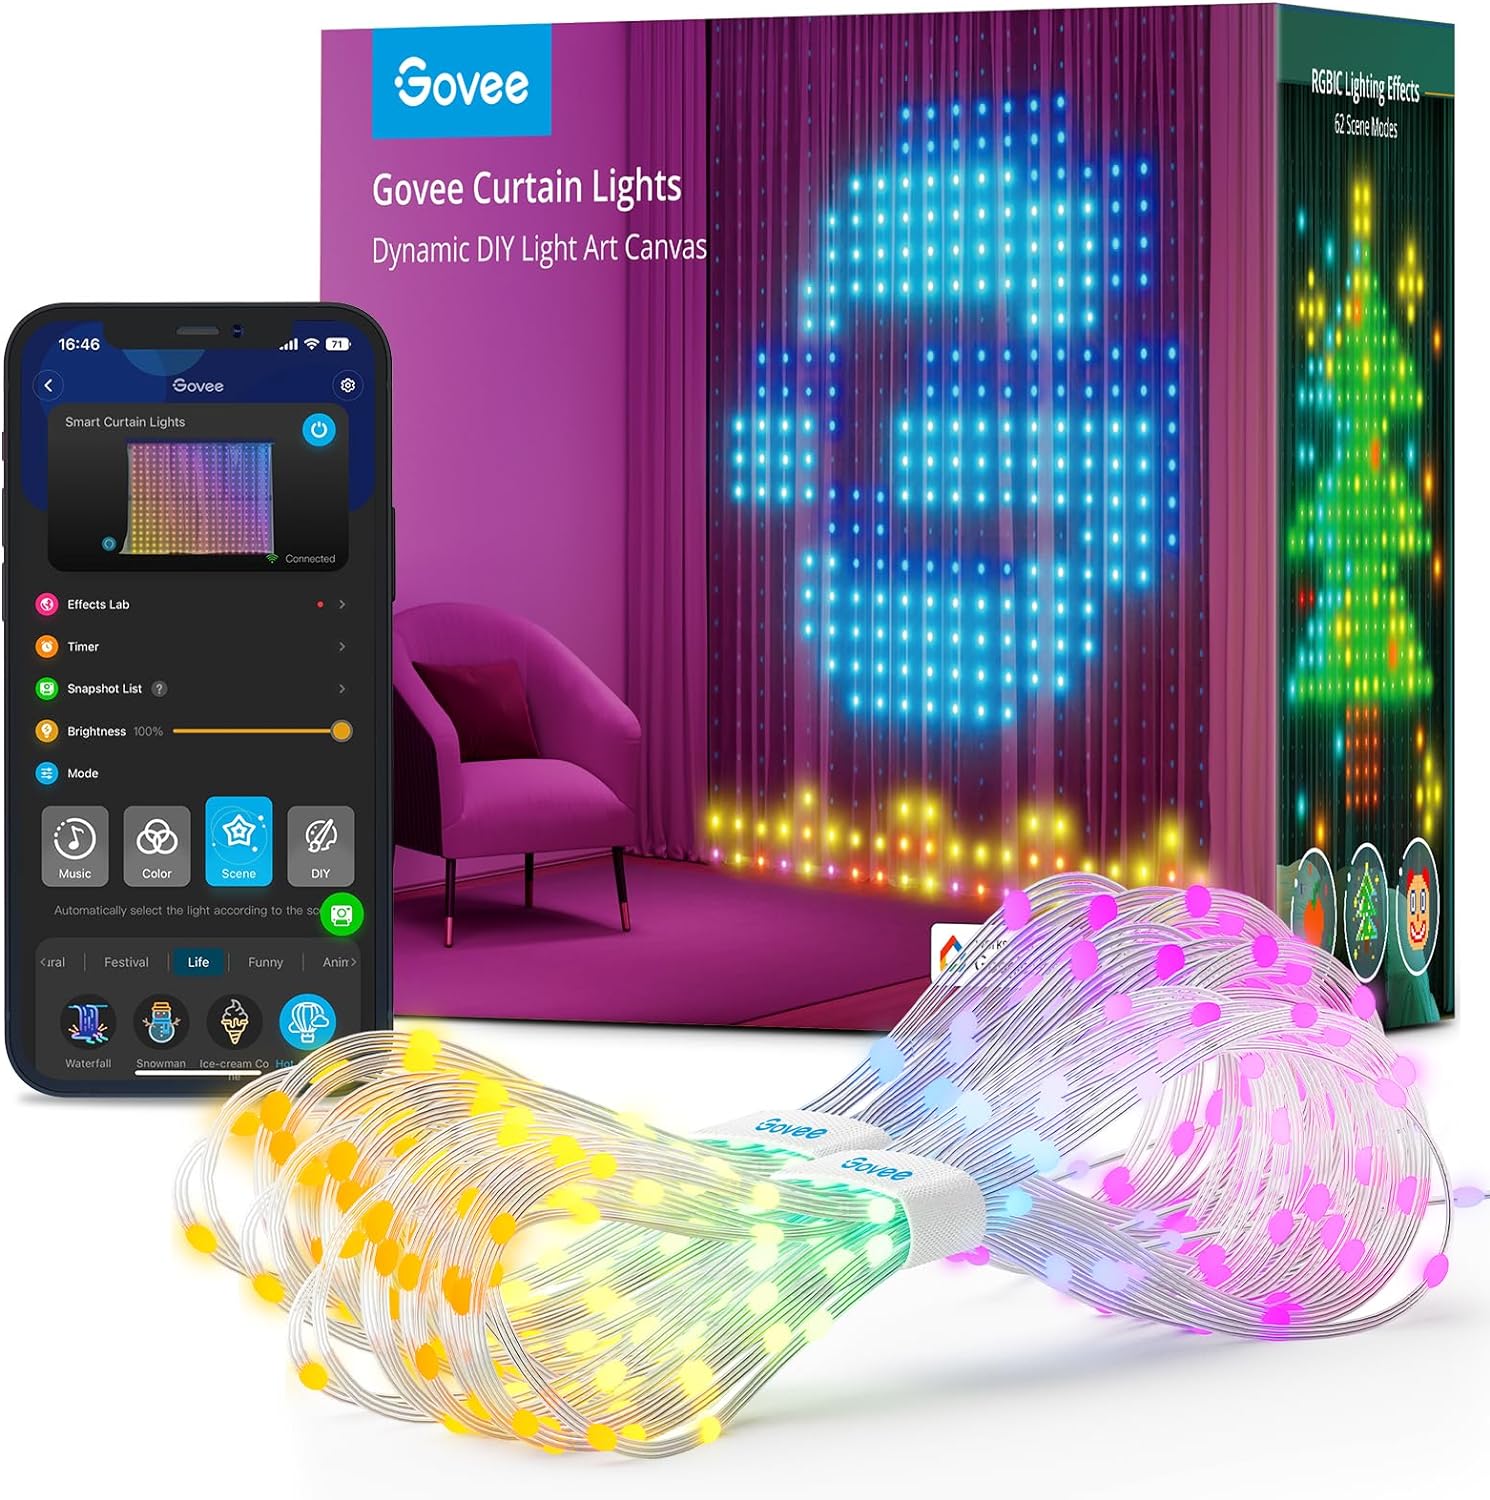 Govee Curtain Lights, WiFi Smart Curtain Lights LED, Color Changing Window Lights, Dynamic DIY Curtain String Lights for Bedroom Wall, Outdoor IP65 Waterproof, 5 x 6.6ft, 520 RGBIC LEDs